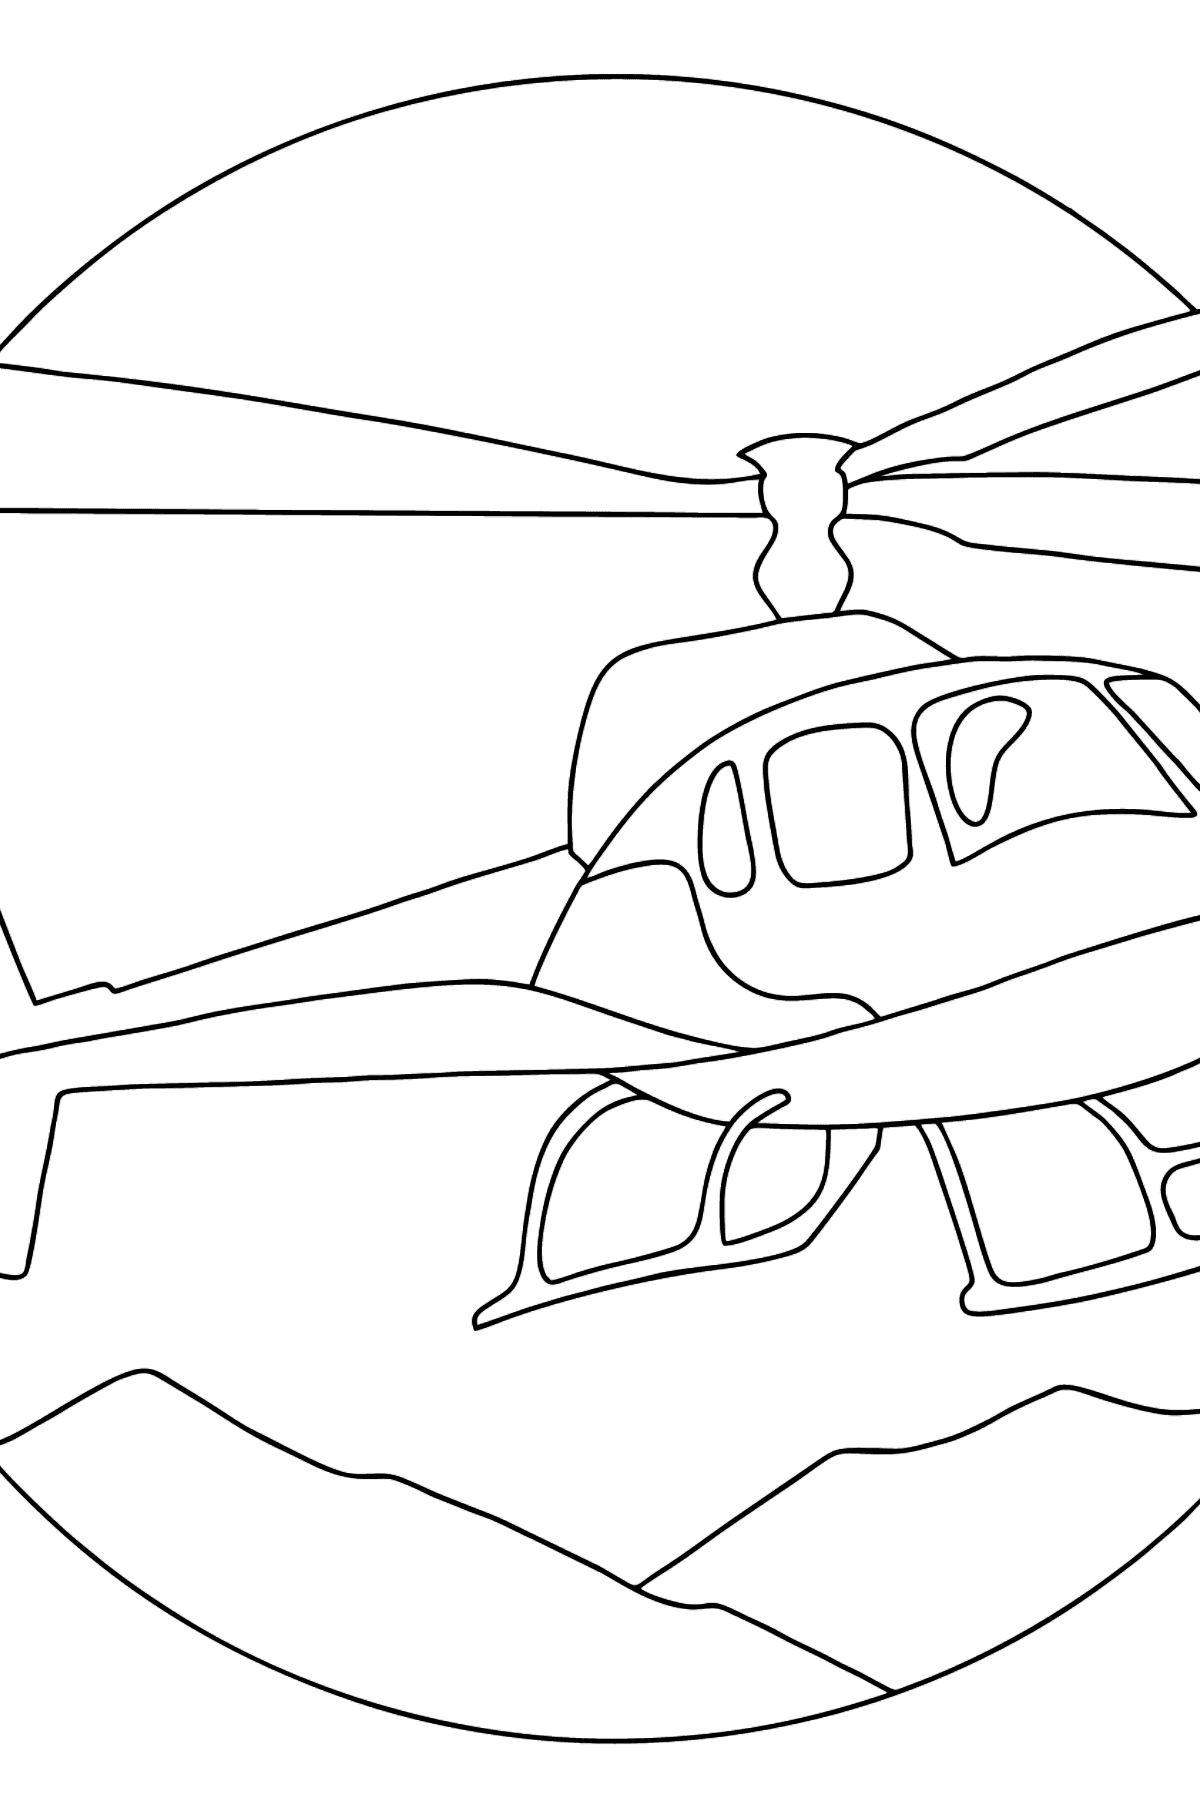 Coloring Page - A City Helicopter - Coloring Pages for Kids